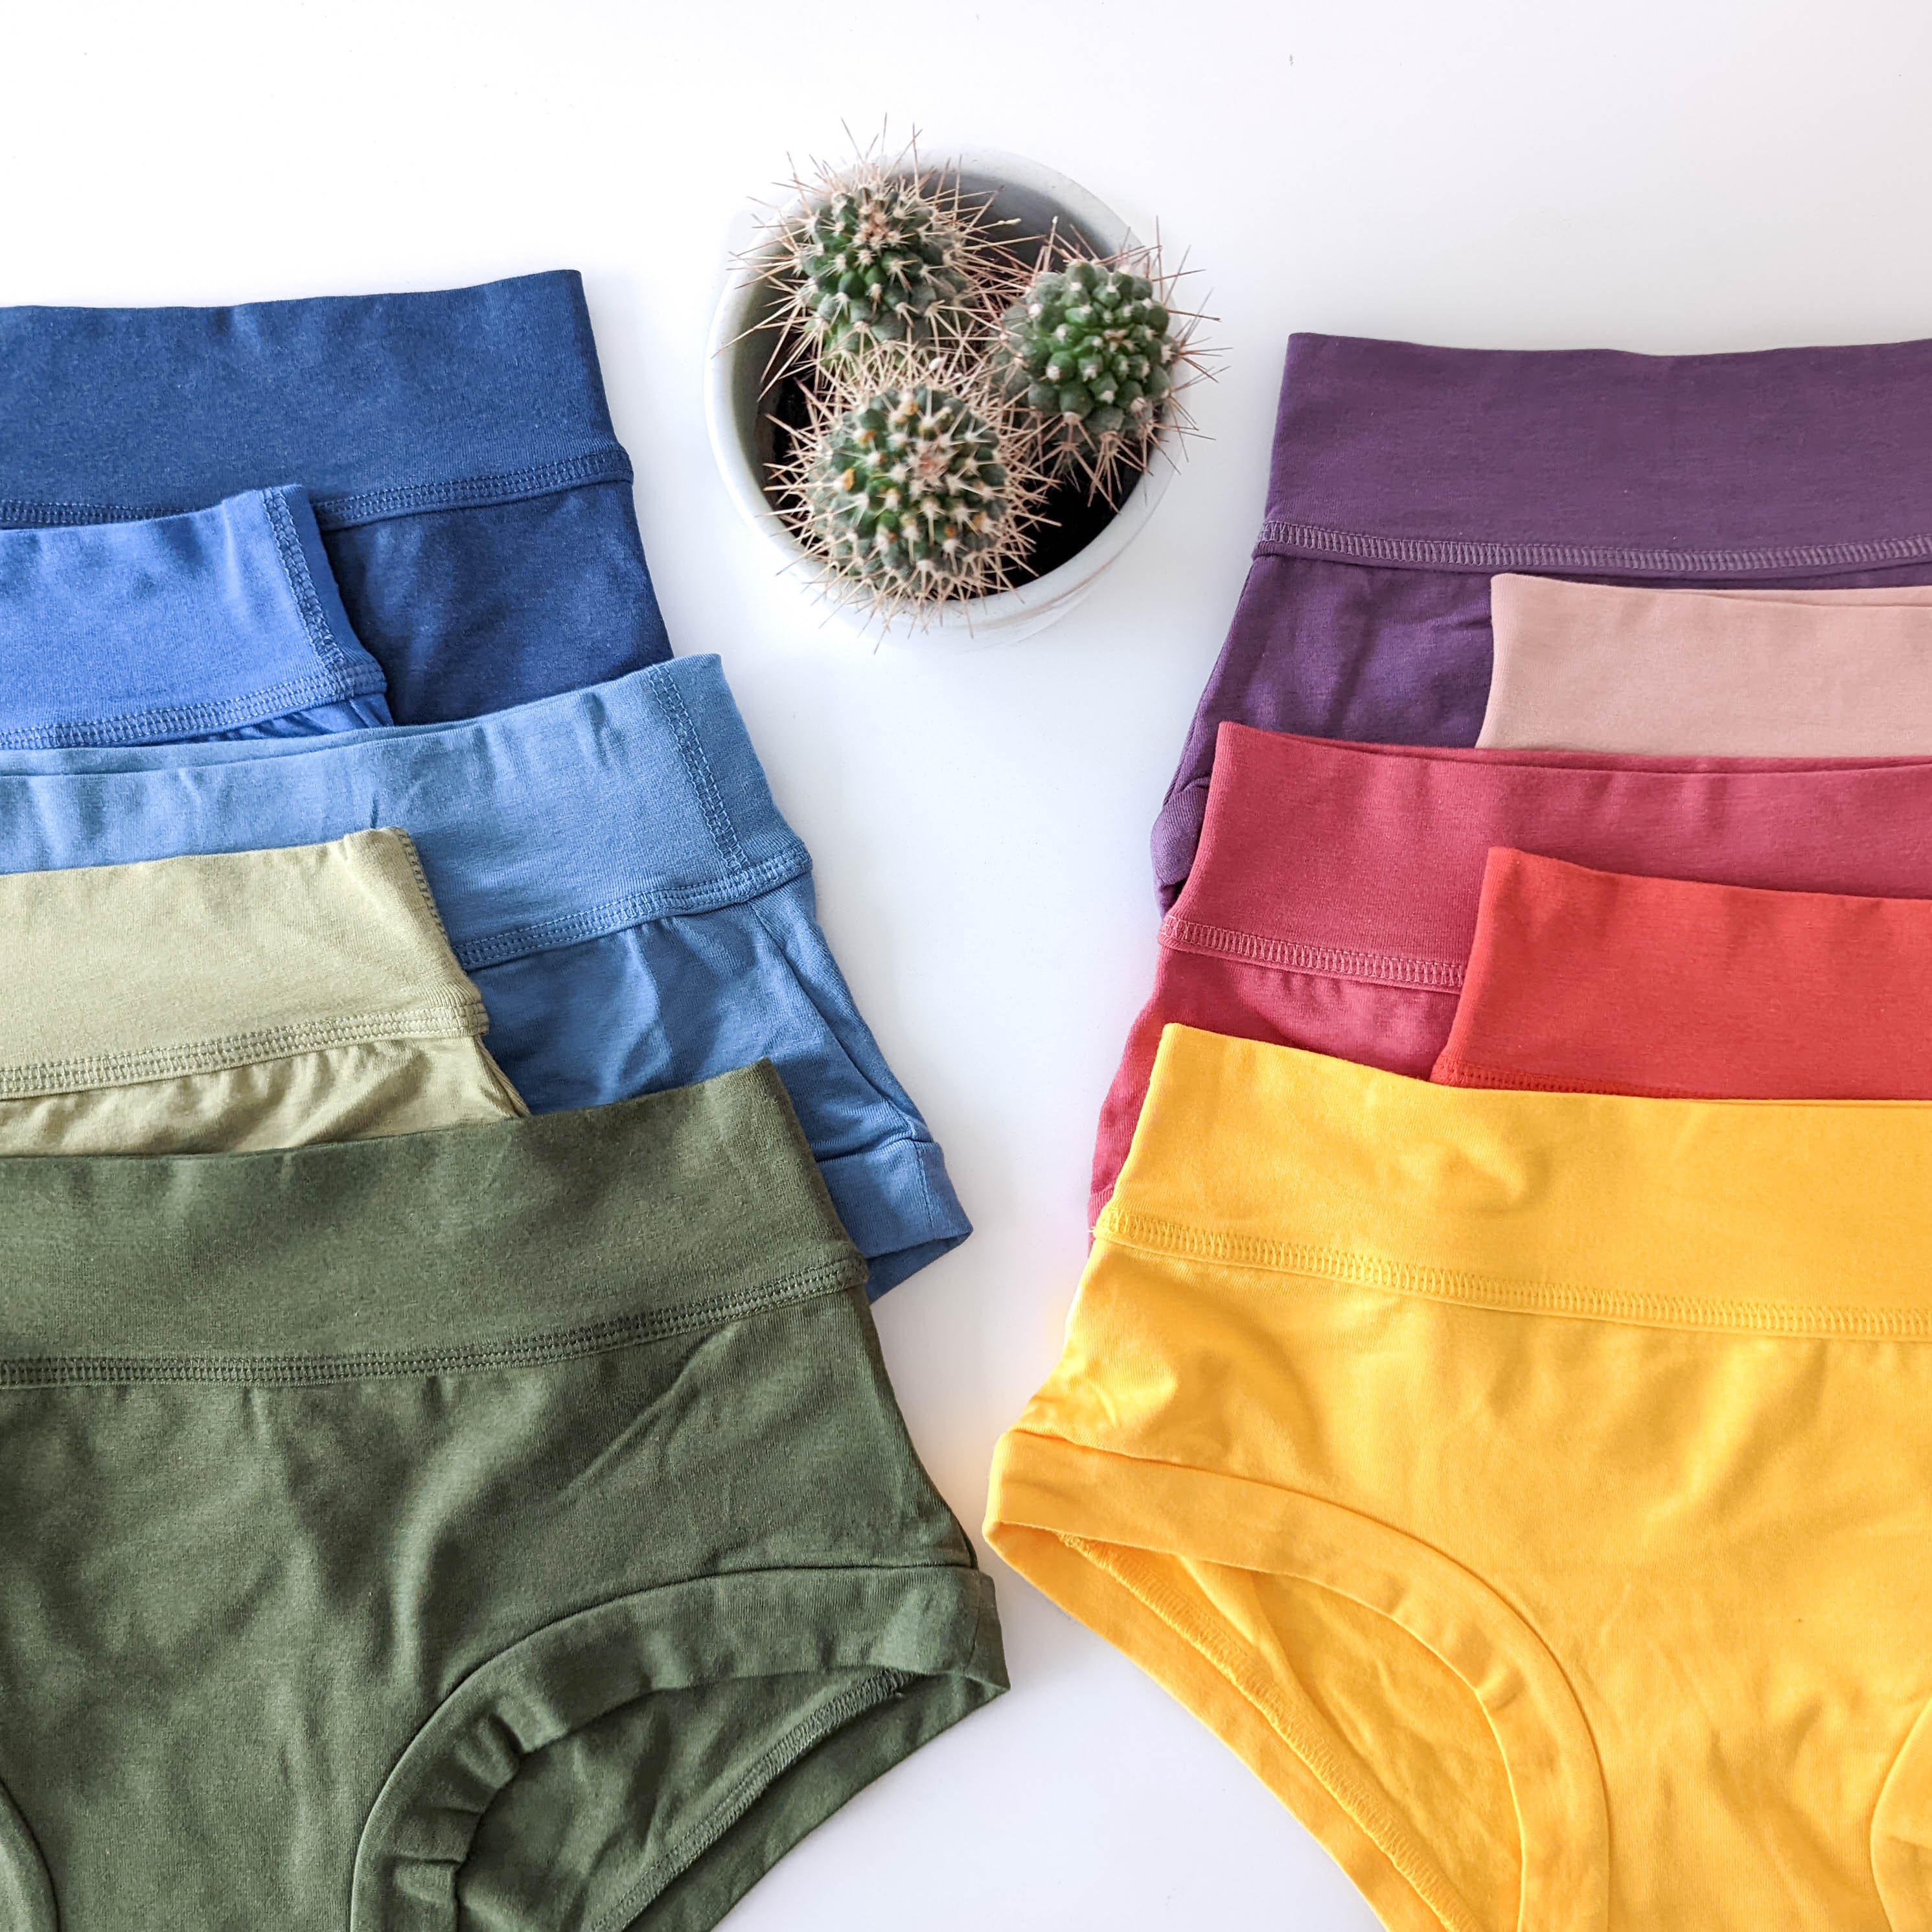 Rainbow Organic Cotton Underwear, Bamboo Lingerie, Elastic Free Panties,  Natural Briefs, Stretchy Comfortable Undies, Mid High Rise -  Canada